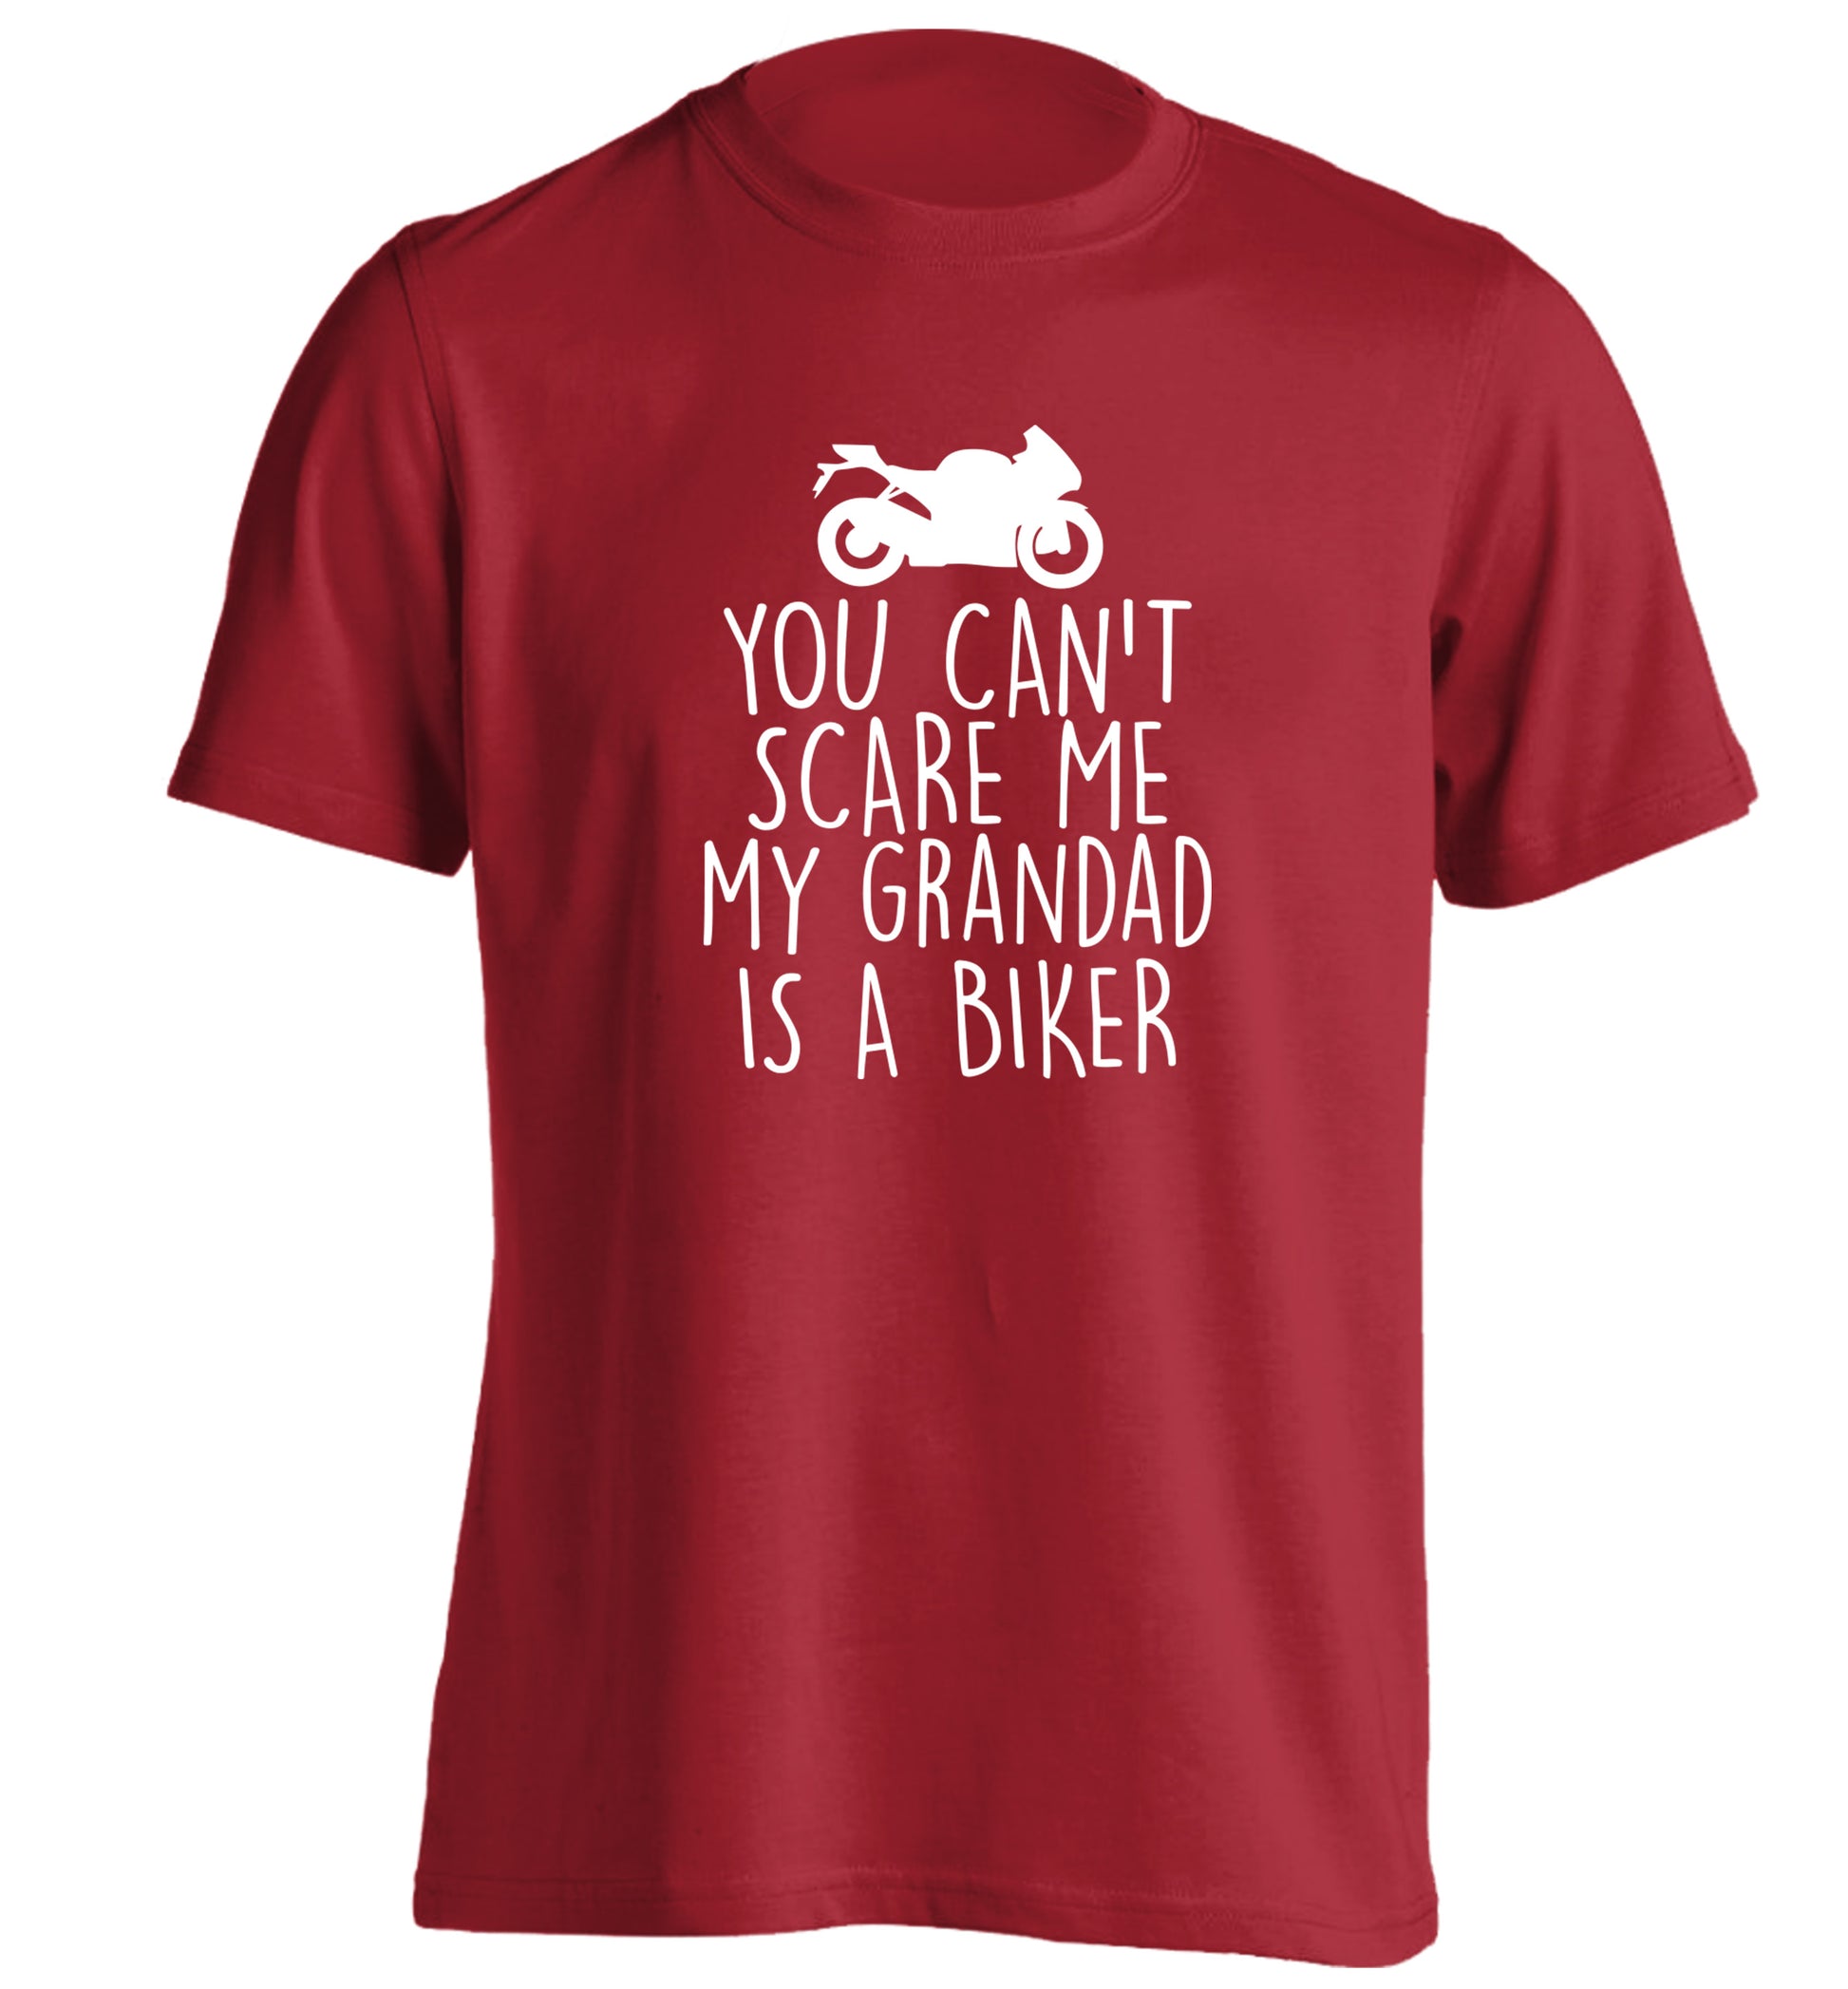 You can't scare me my grandad is a biker adults unisex red Tshirt 2XL